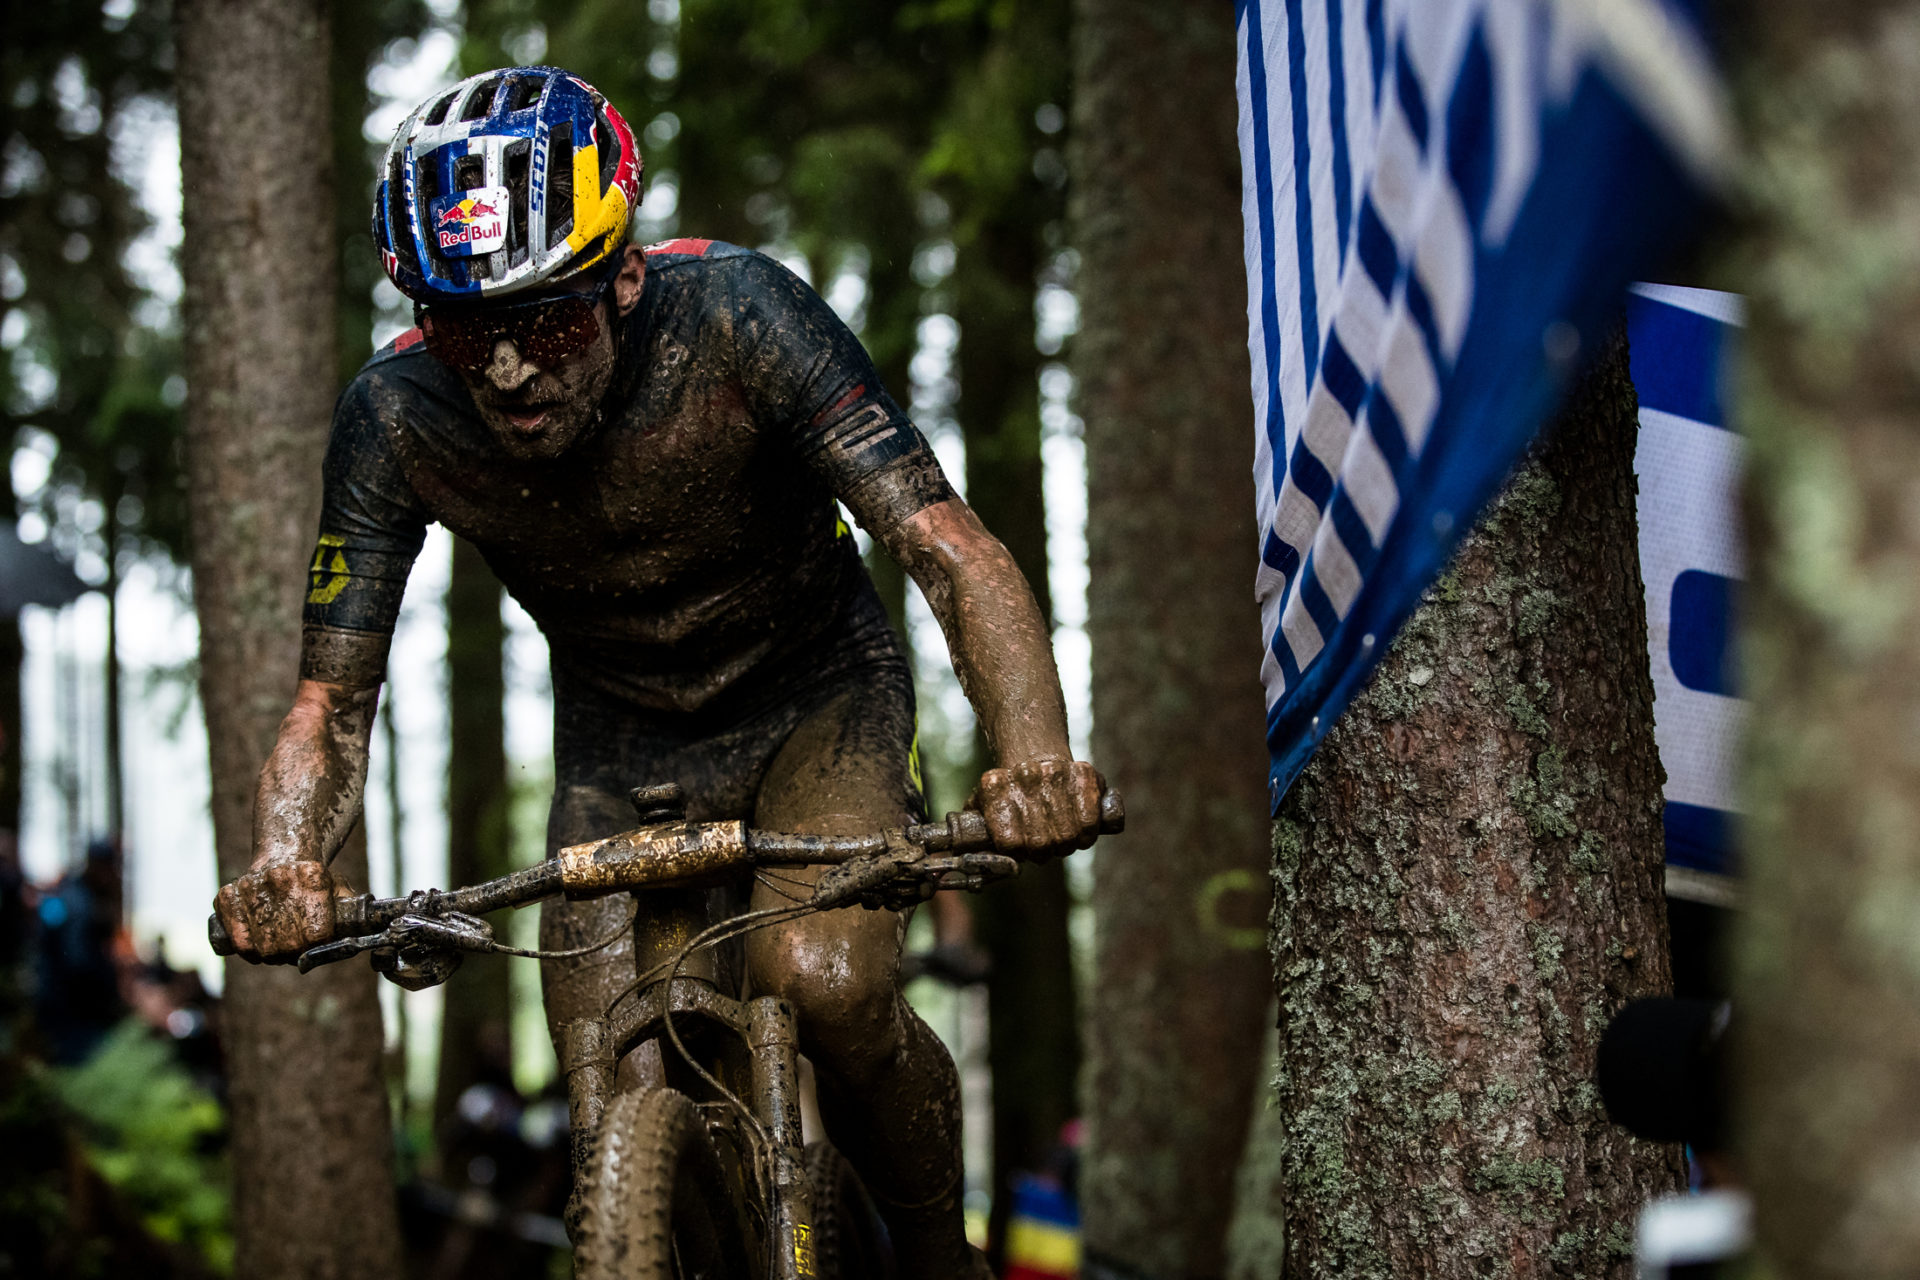 Muddy conditions for racers